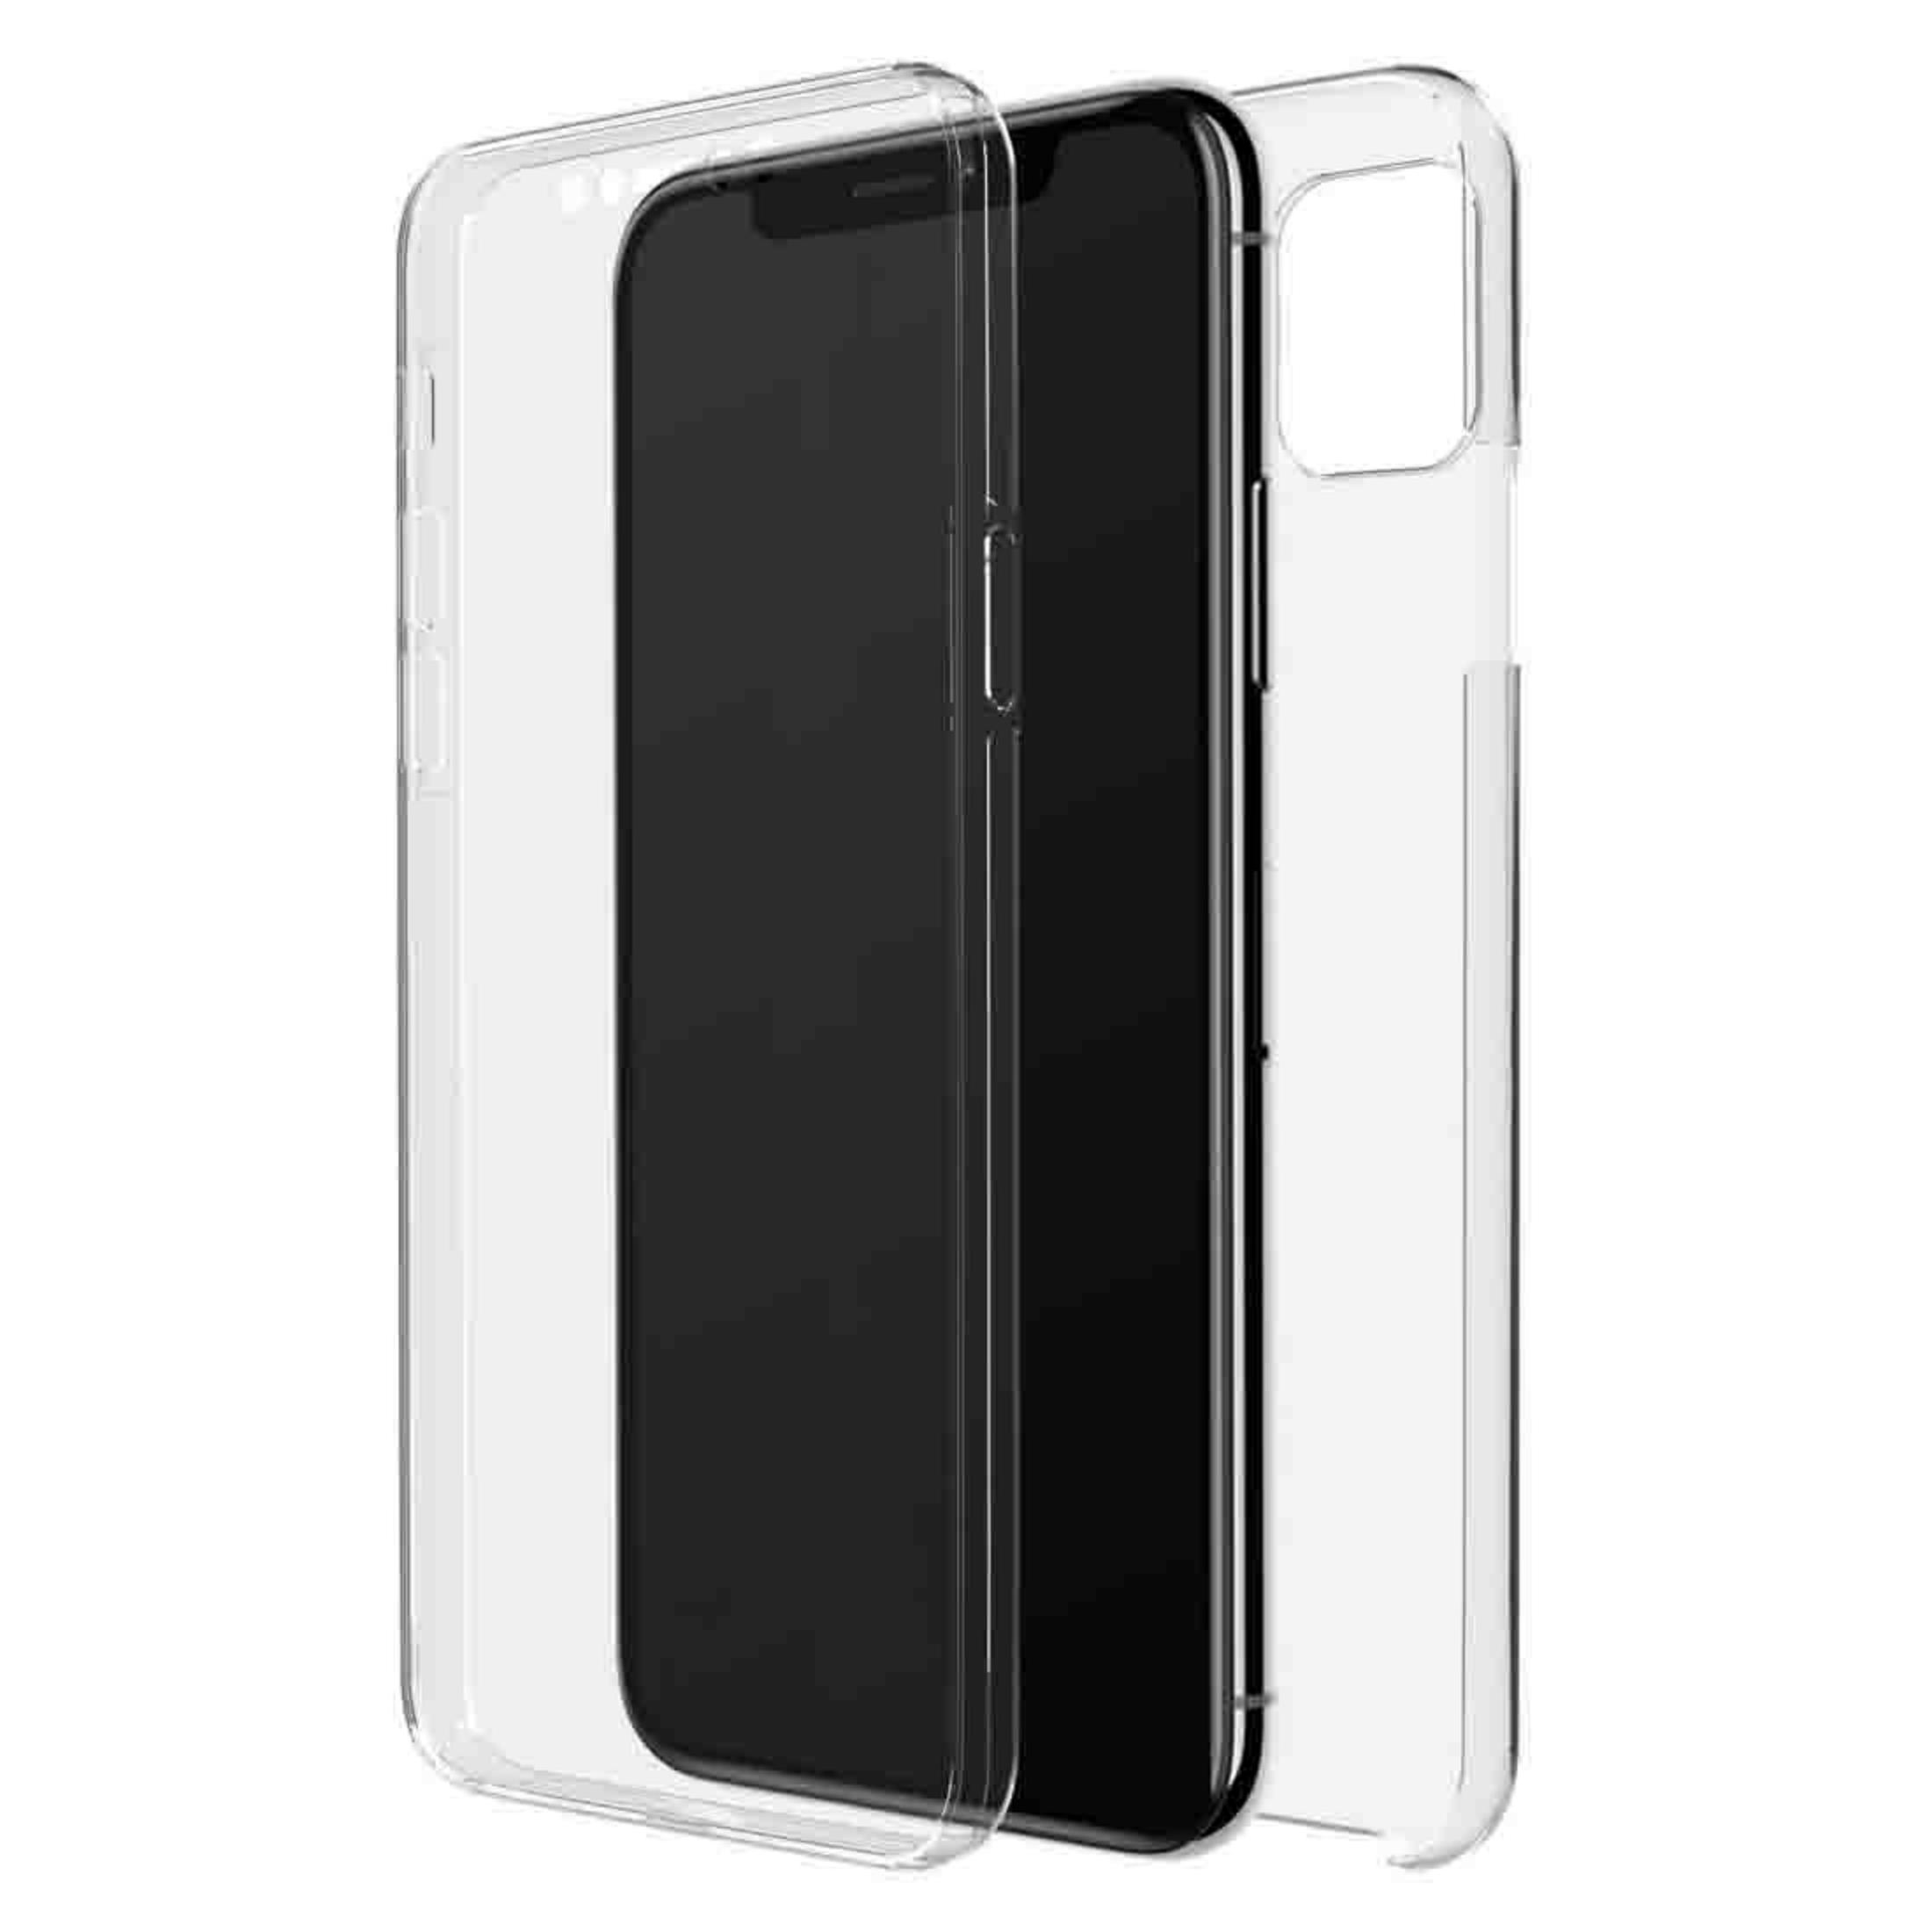 Pro 360° 187025 PRO, Cover, 11 iPhone 11 BLACK ROCK CLEAR Full Max, Transparent IPHONE Apple, CO